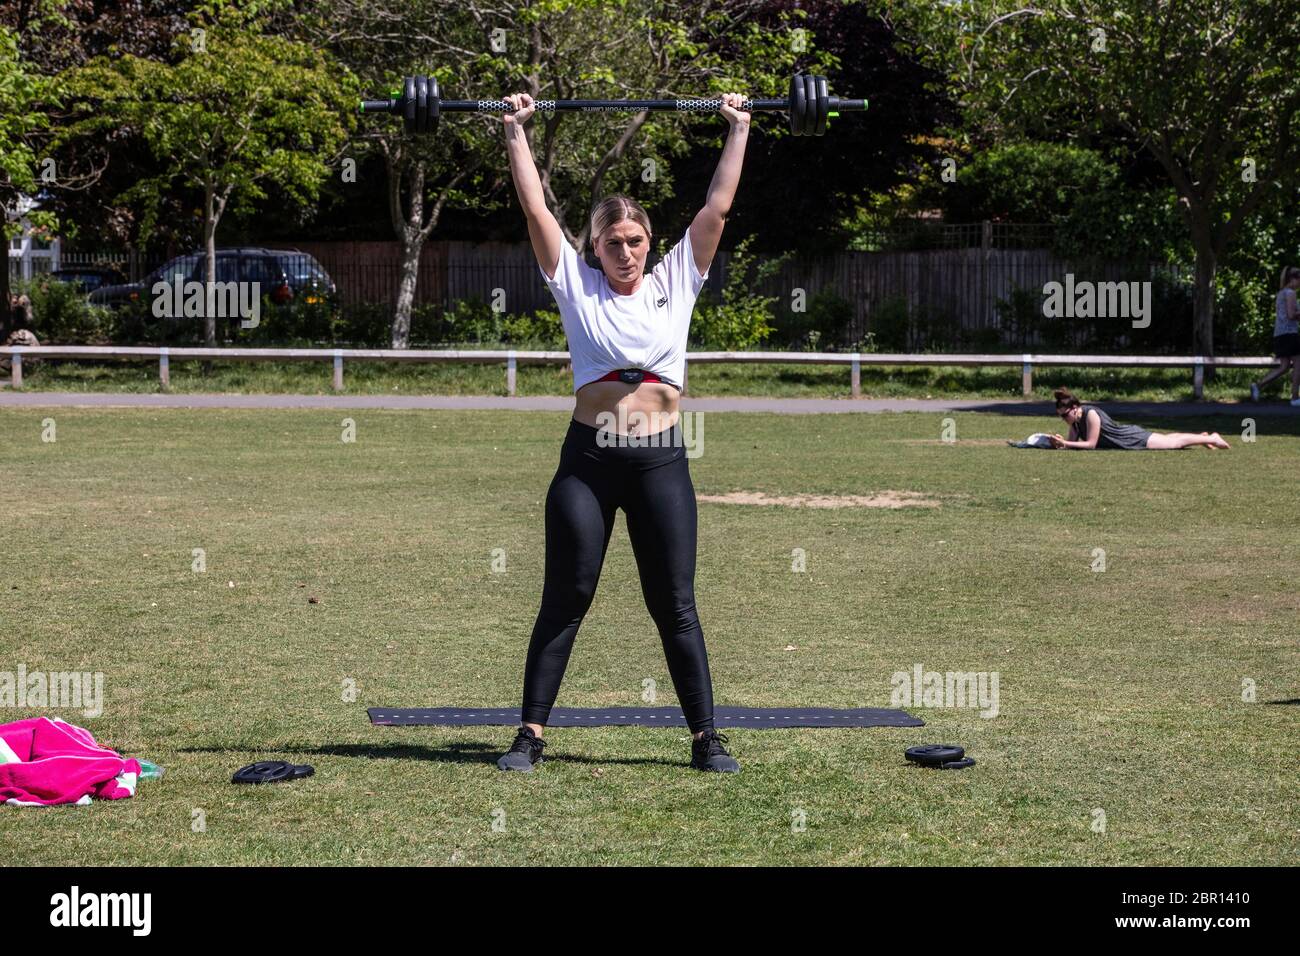 Wimbledon, London, UK. 20th May, 2020. People enjoy warmest day of 2020 during a mini heatwave this week. 20th May 2020. South Wimbledon, Southwest London, UK Chelsea Kenny from Banstead lifts wieghts whilst enjoying the warm temperature after the coronavirus lockdwon has been relaxed and people can spend more time outside in the local parks across the United Kingdom. Credit: Clickpics/Alamy Live News Stock Photo